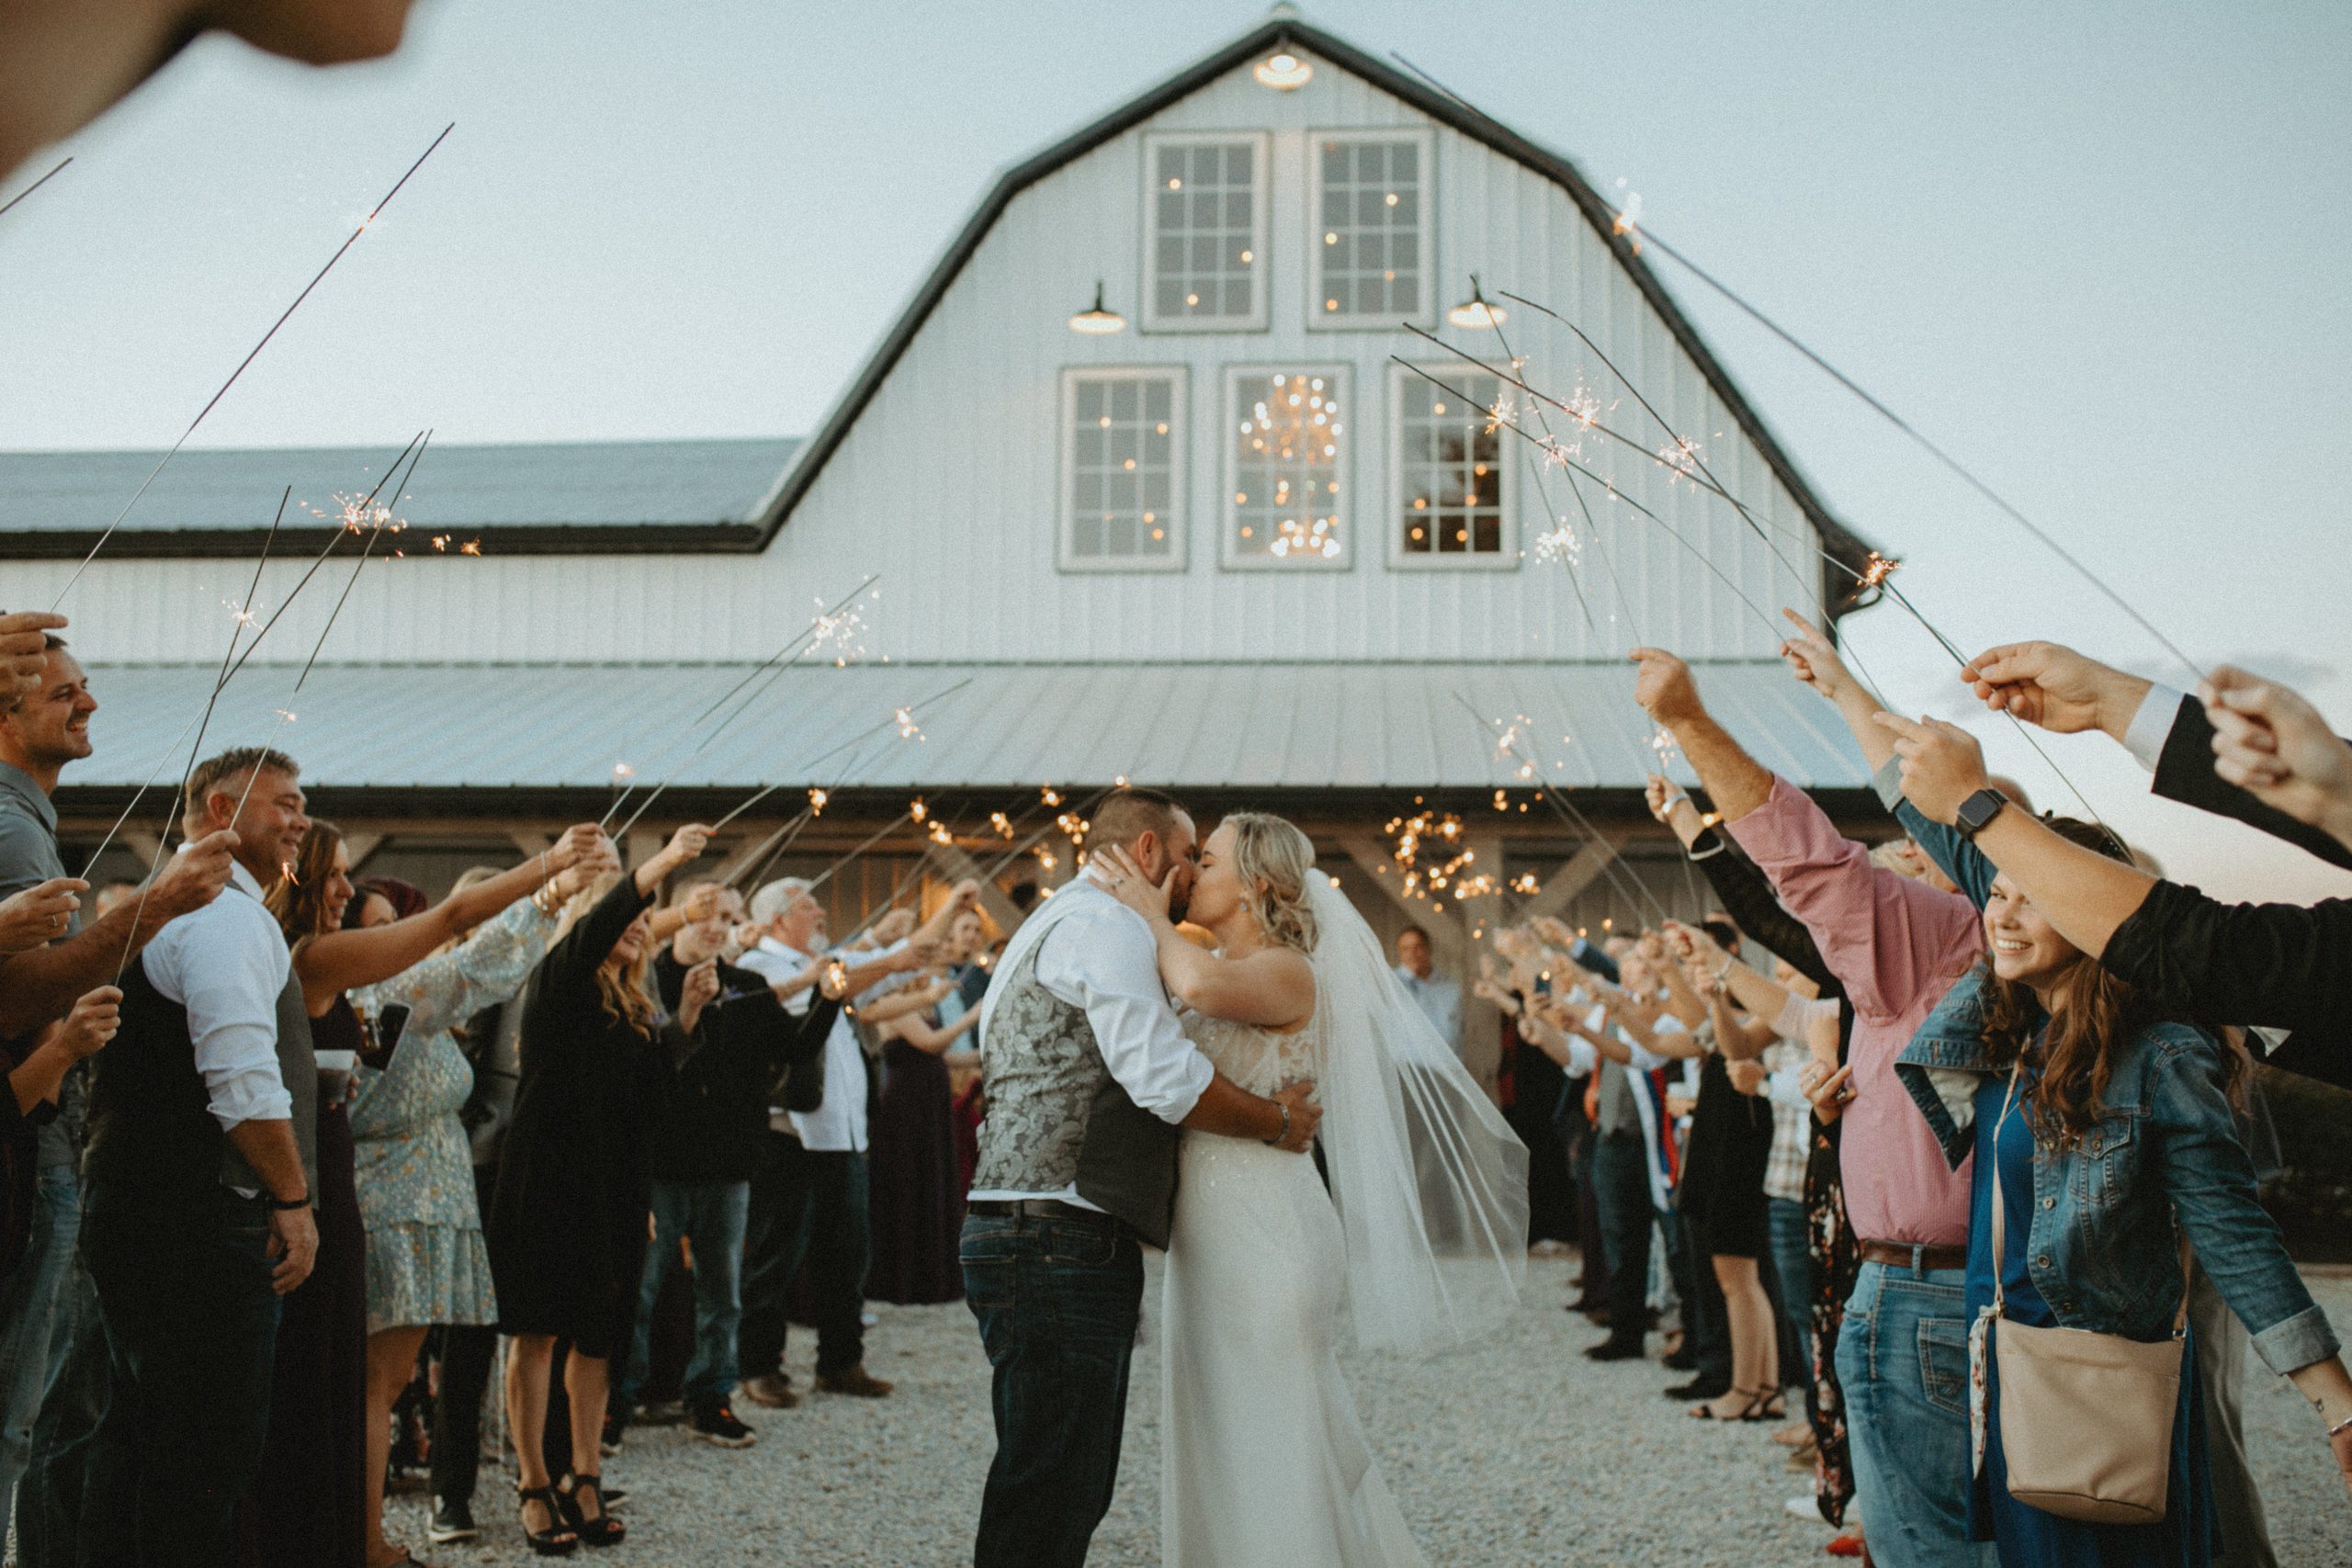 Top 5 of the best wedding venues in Central Indiana